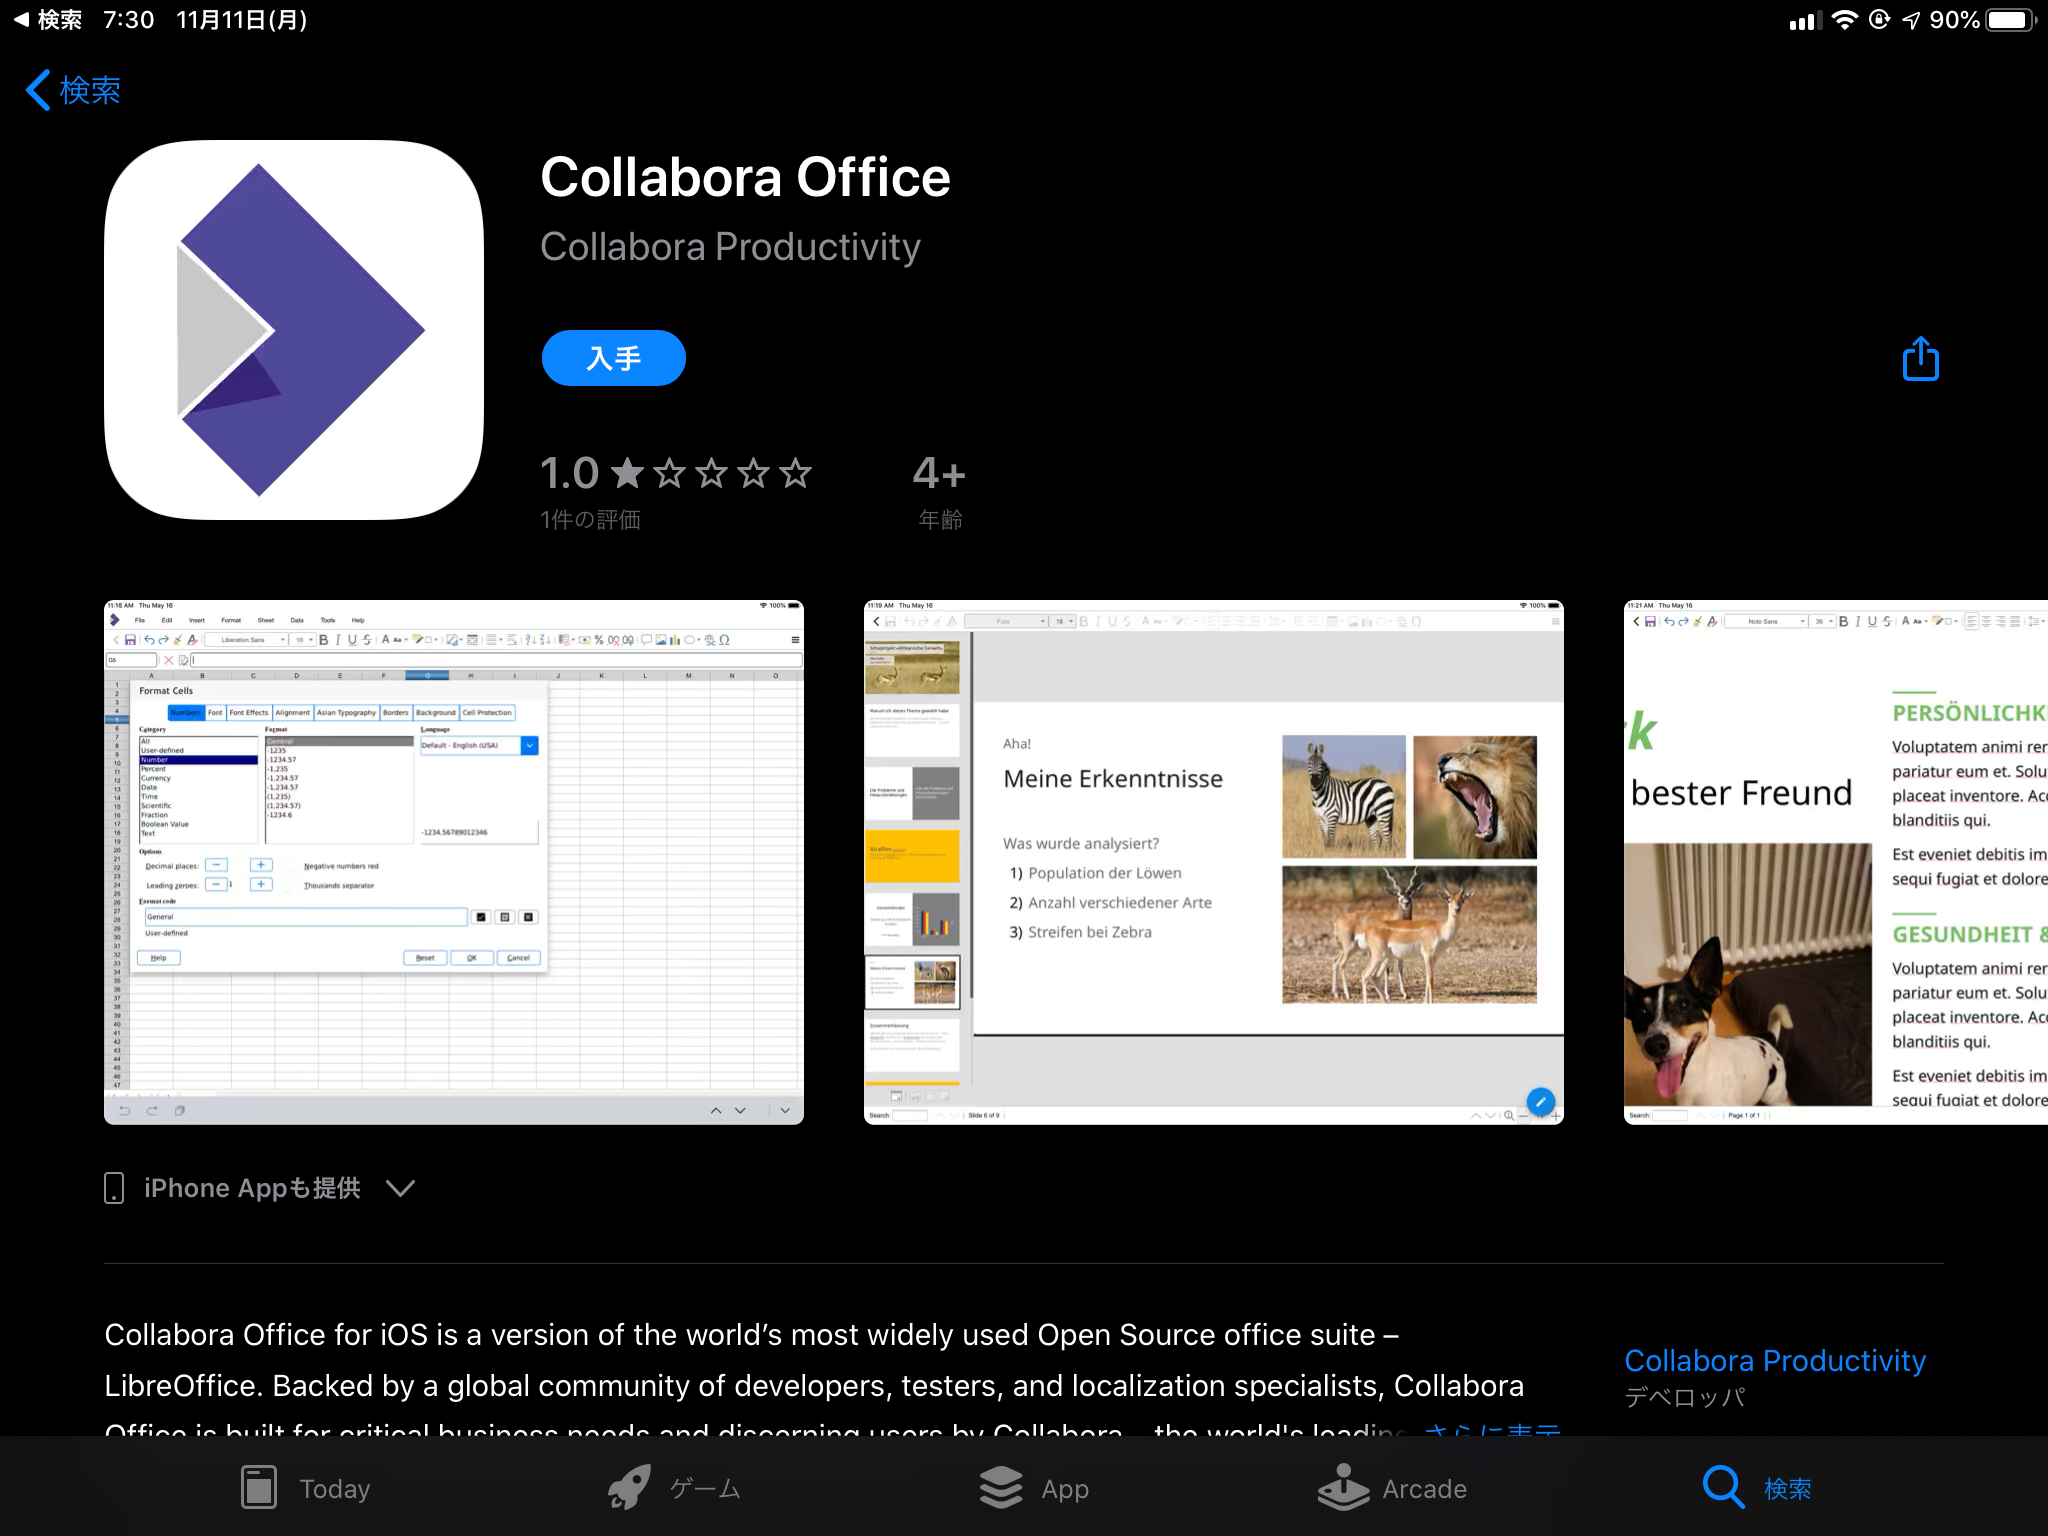 download the last version for iphoneLibreOffice 7.6.4